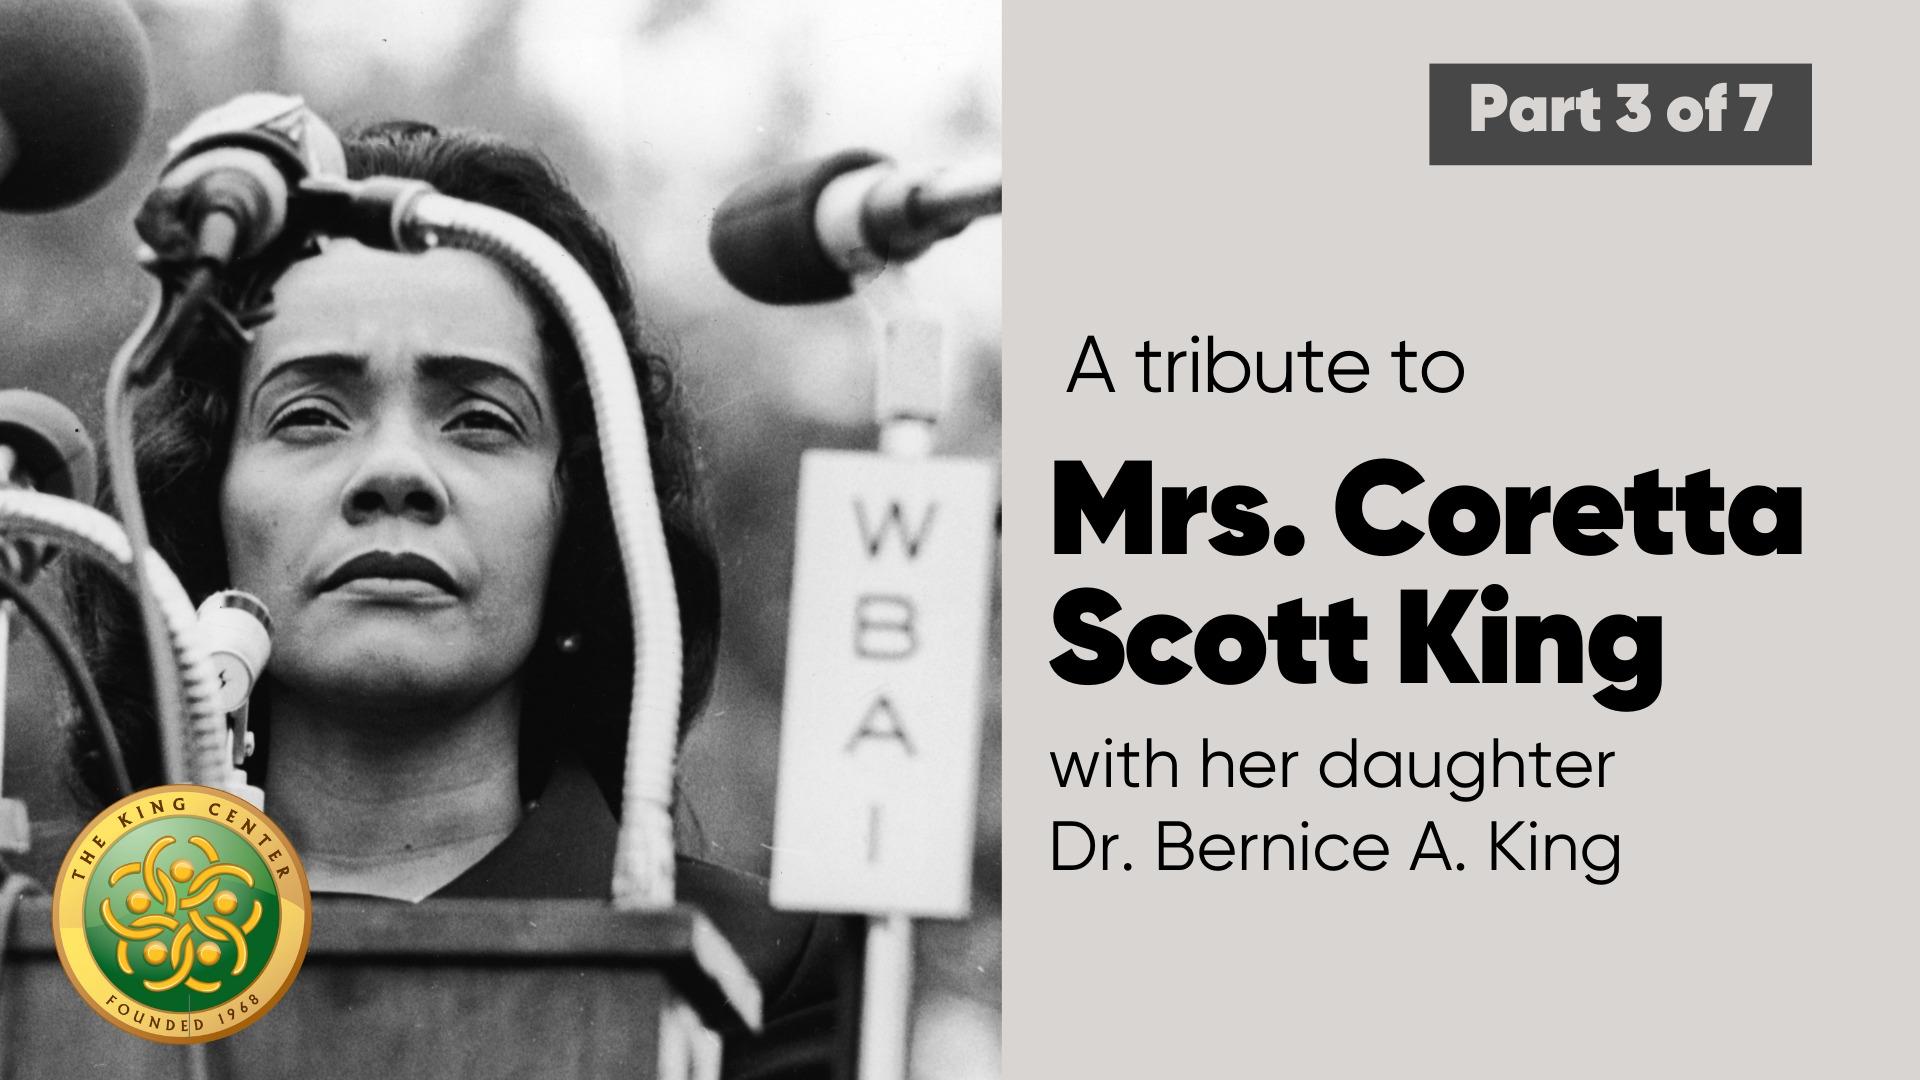 A tribute to Mrs. Coretta Scott King with her daughter Dr. Bernice A. King- Part 3 of 7